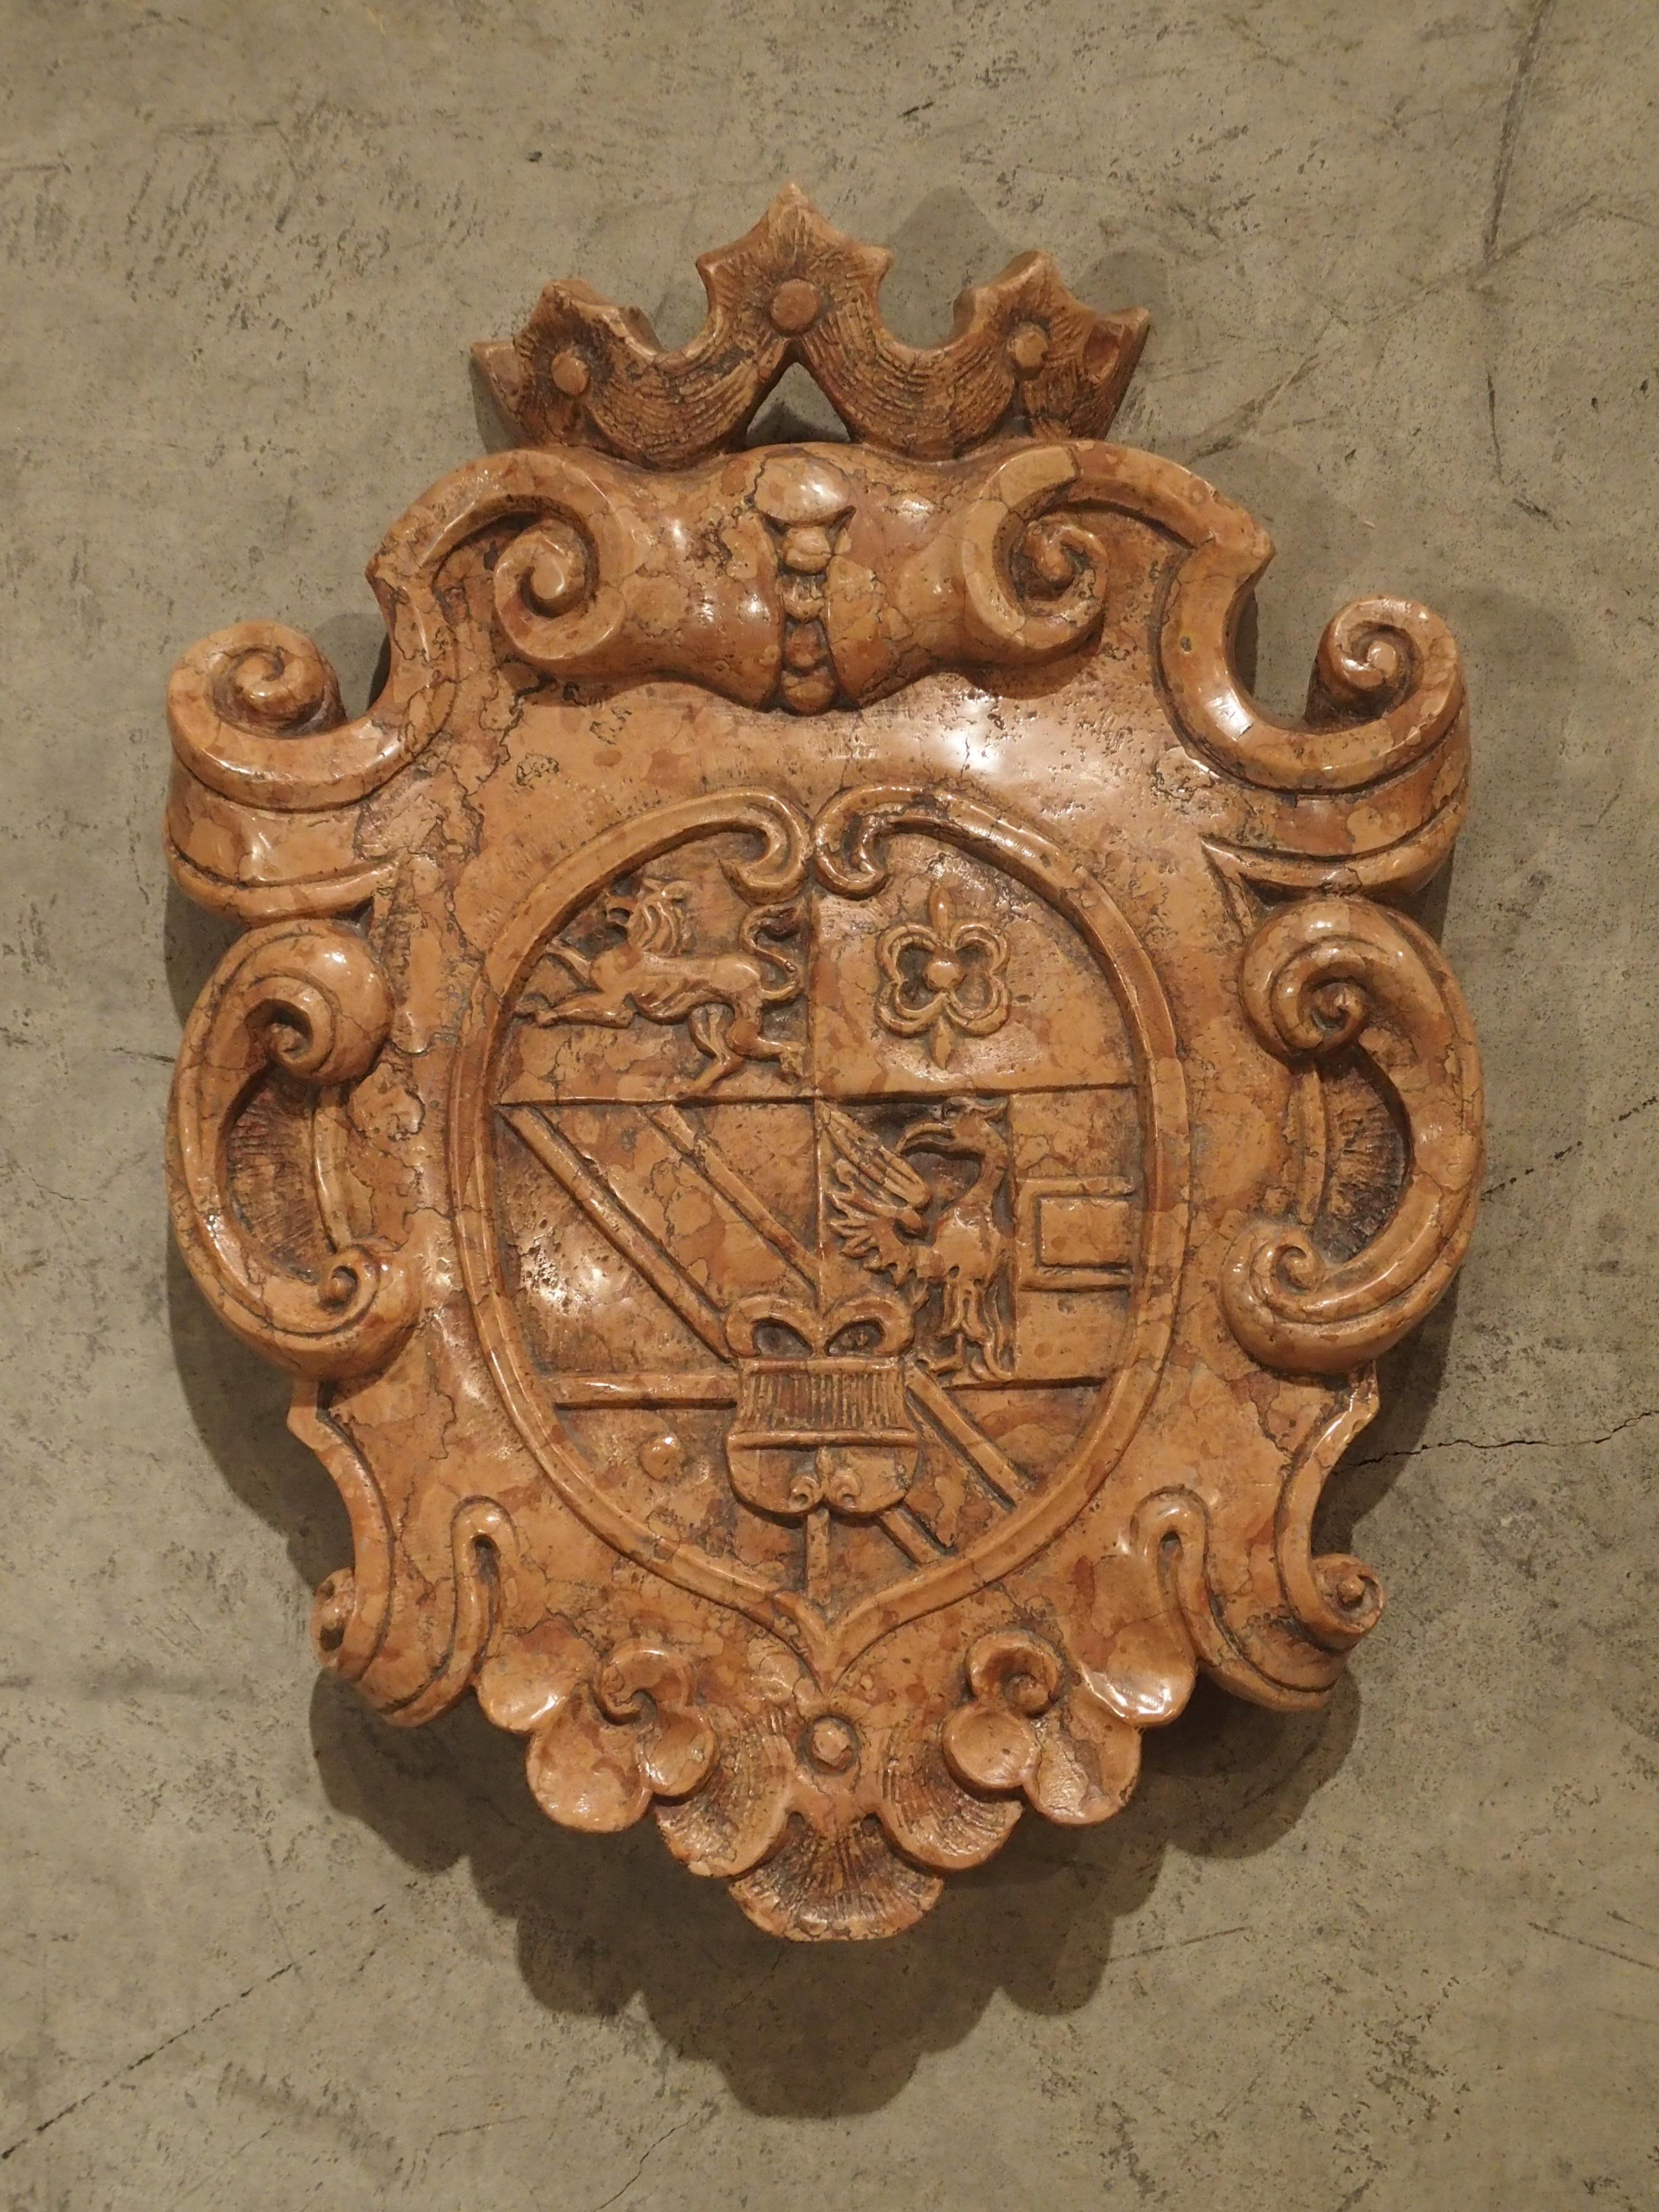 This shield has been carved out of one solid piece of Rosso Verona marble. A stylized crown is at the top of the shield, which is surrounded by a series of different scrolls with floral motifs. In the central coat of arms section, we see images of a